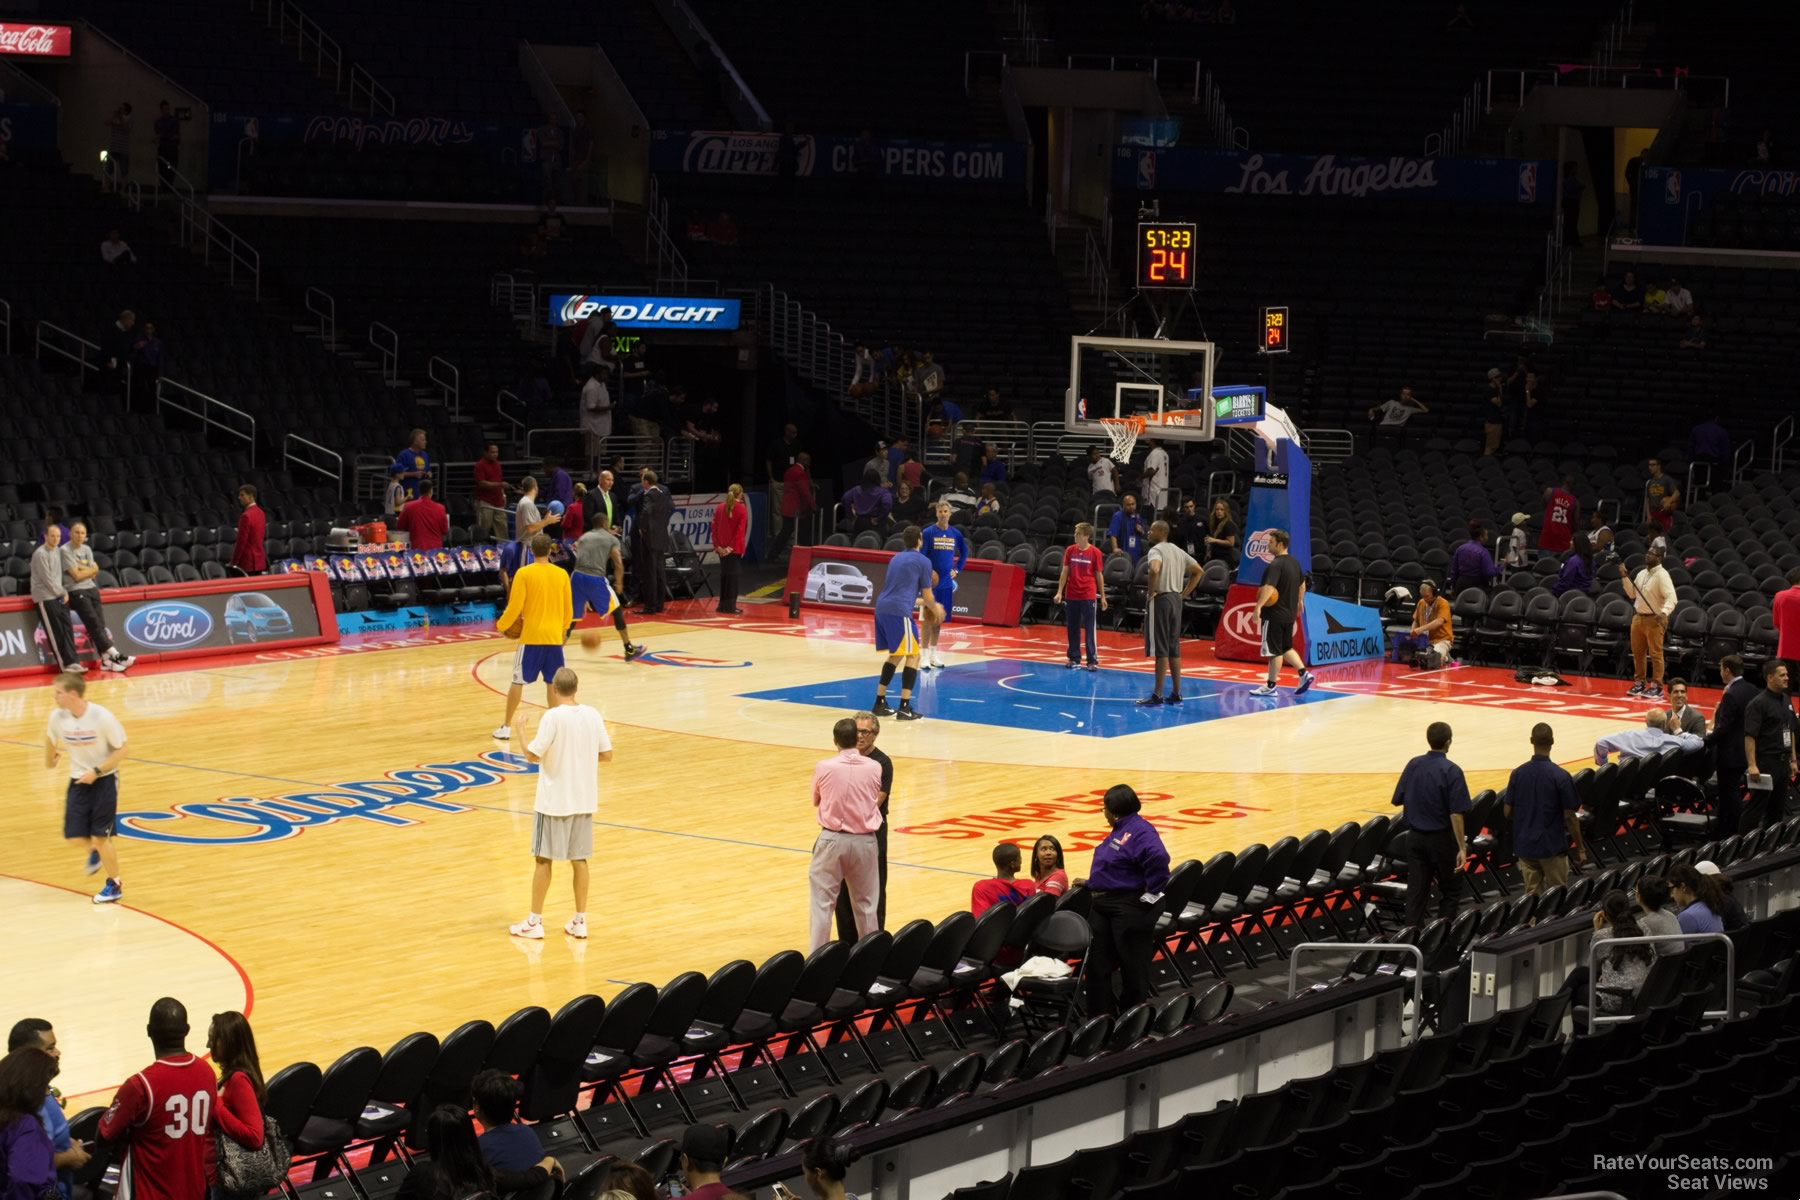 Staples Center Section 114 - Clippers/Lakers - RateYourSeats.com1800 x 1200